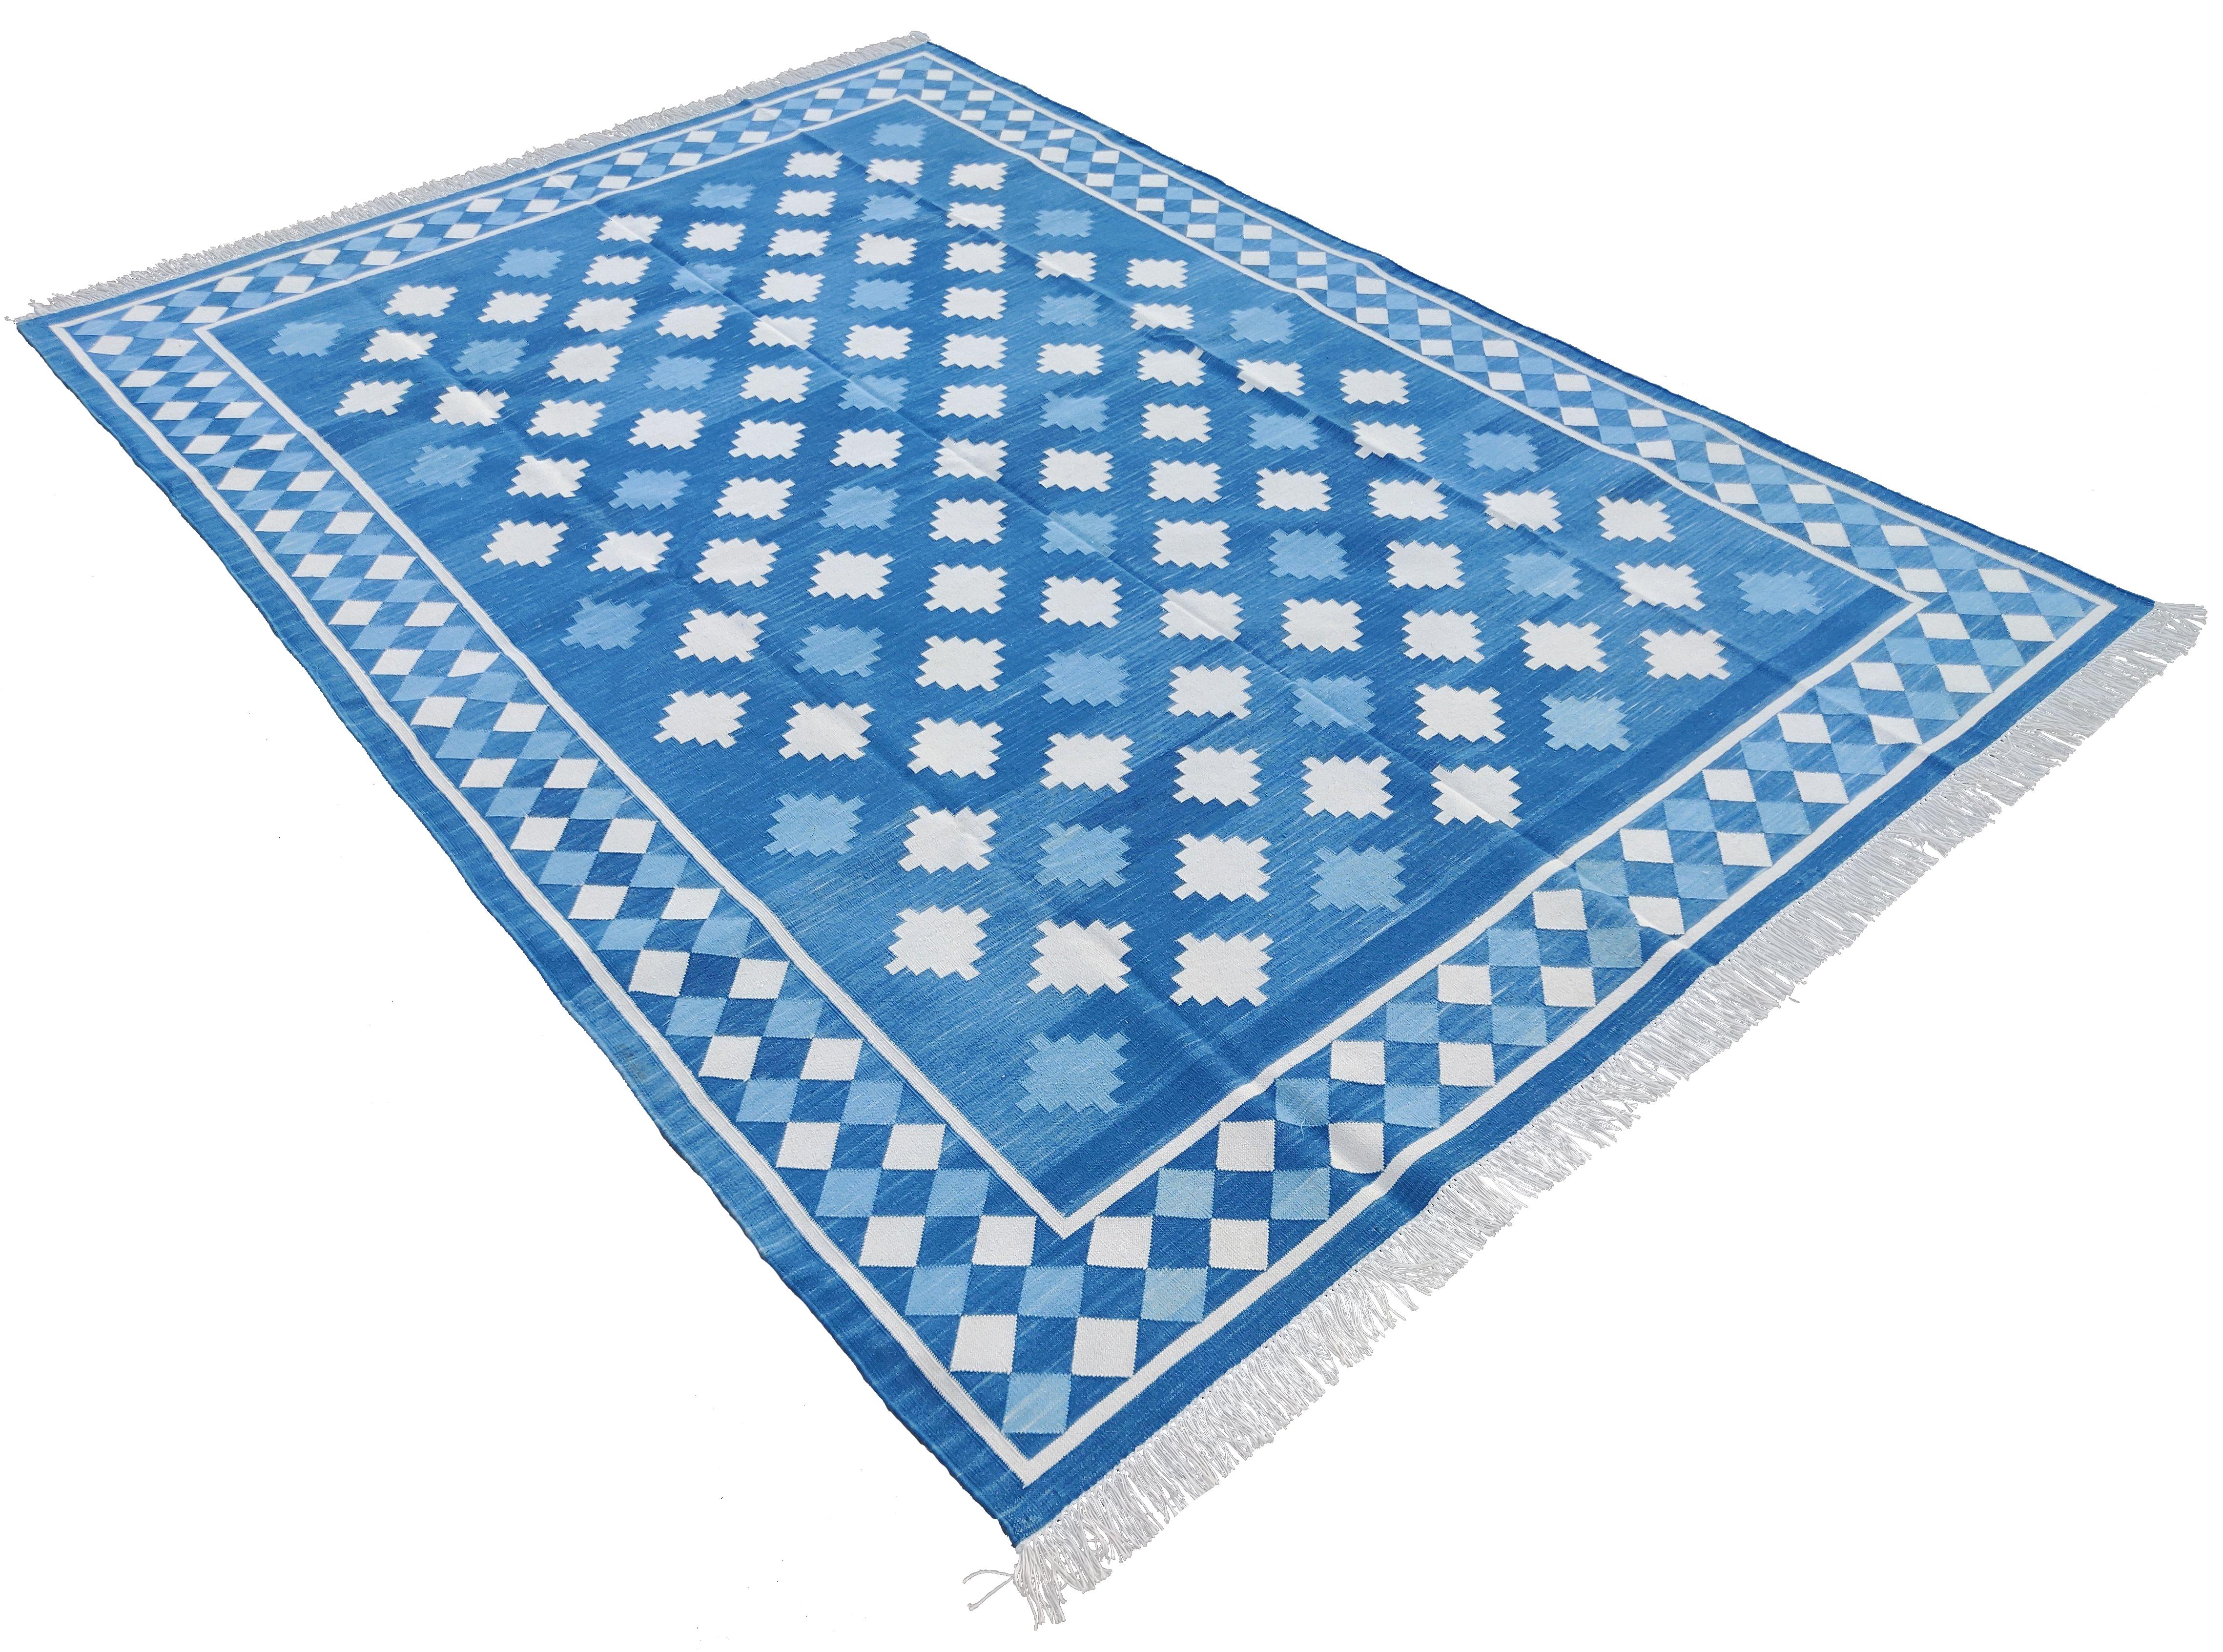 Cotton Natural Vegetable Dyed Cream, Blue And Cream Geometric Star Indian Rug-6'x9'
These special flat-weave dhurries are hand-woven with 15 ply 100% cotton yarn. Due to the special manufacturing techniques used to create our rugs, the size and